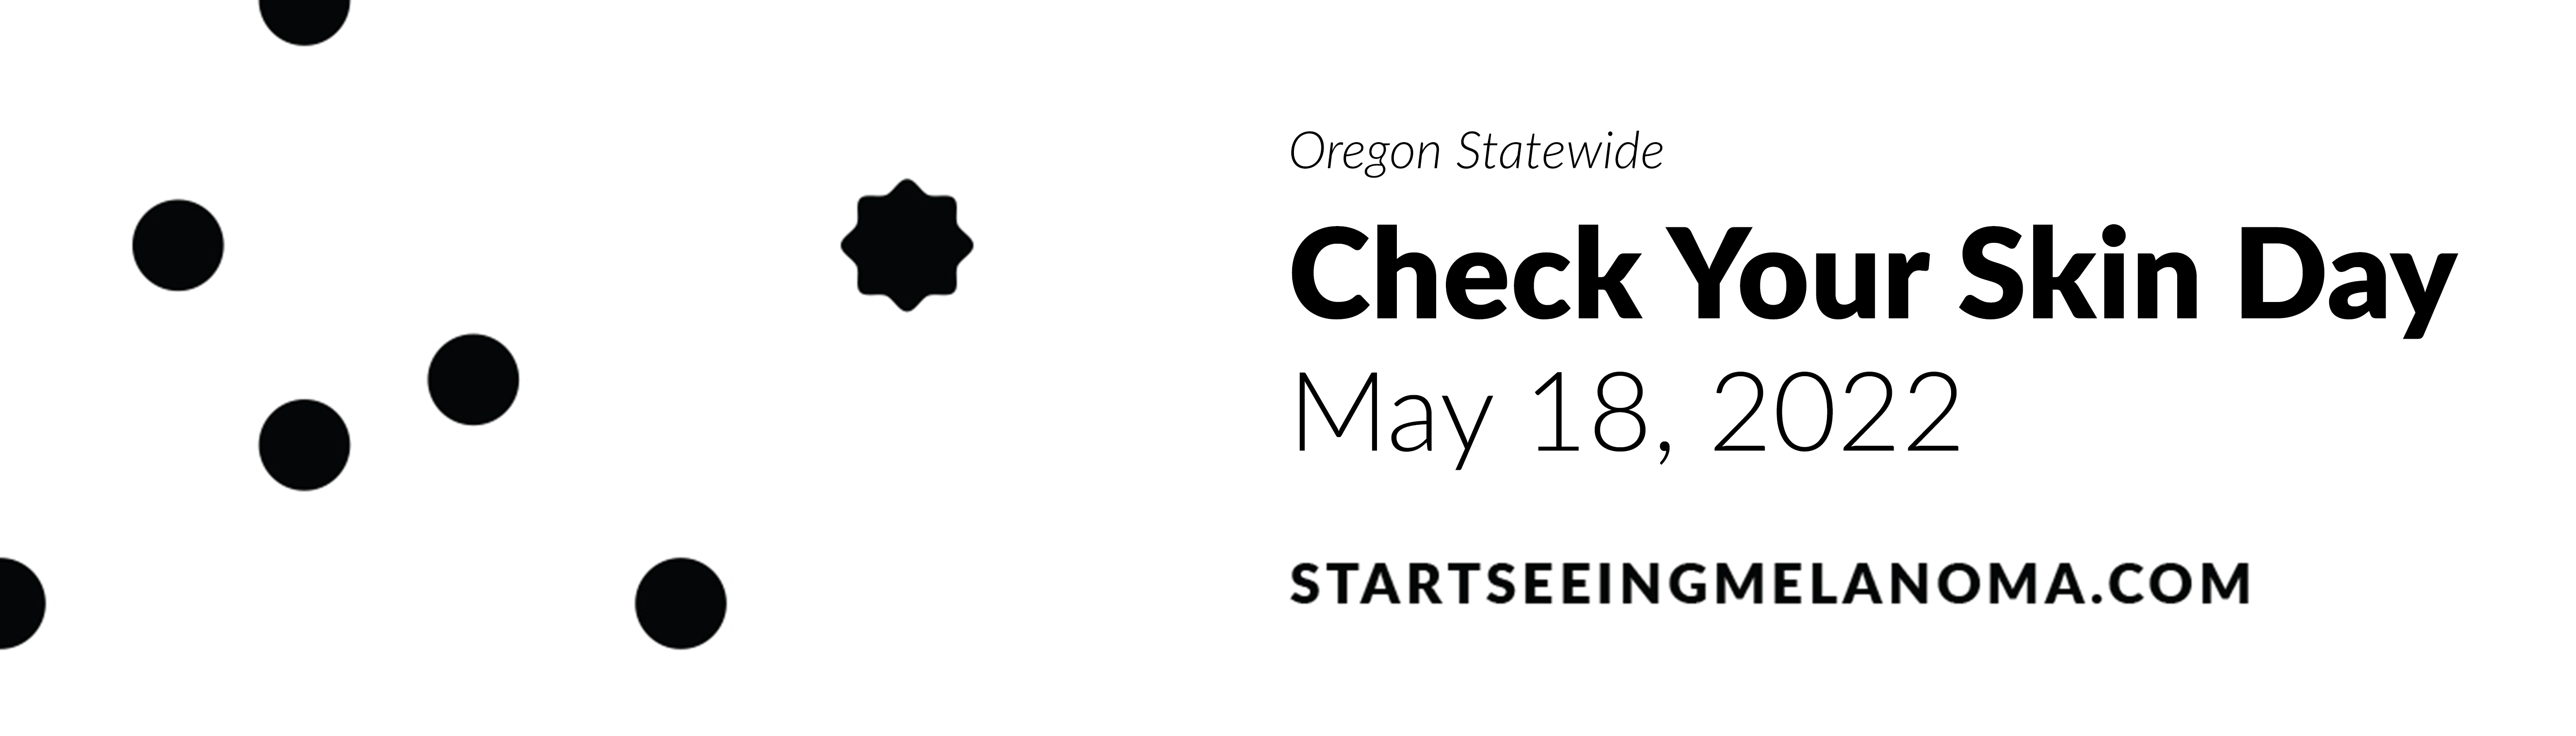 Oregon Check Your Skin Day is May 18